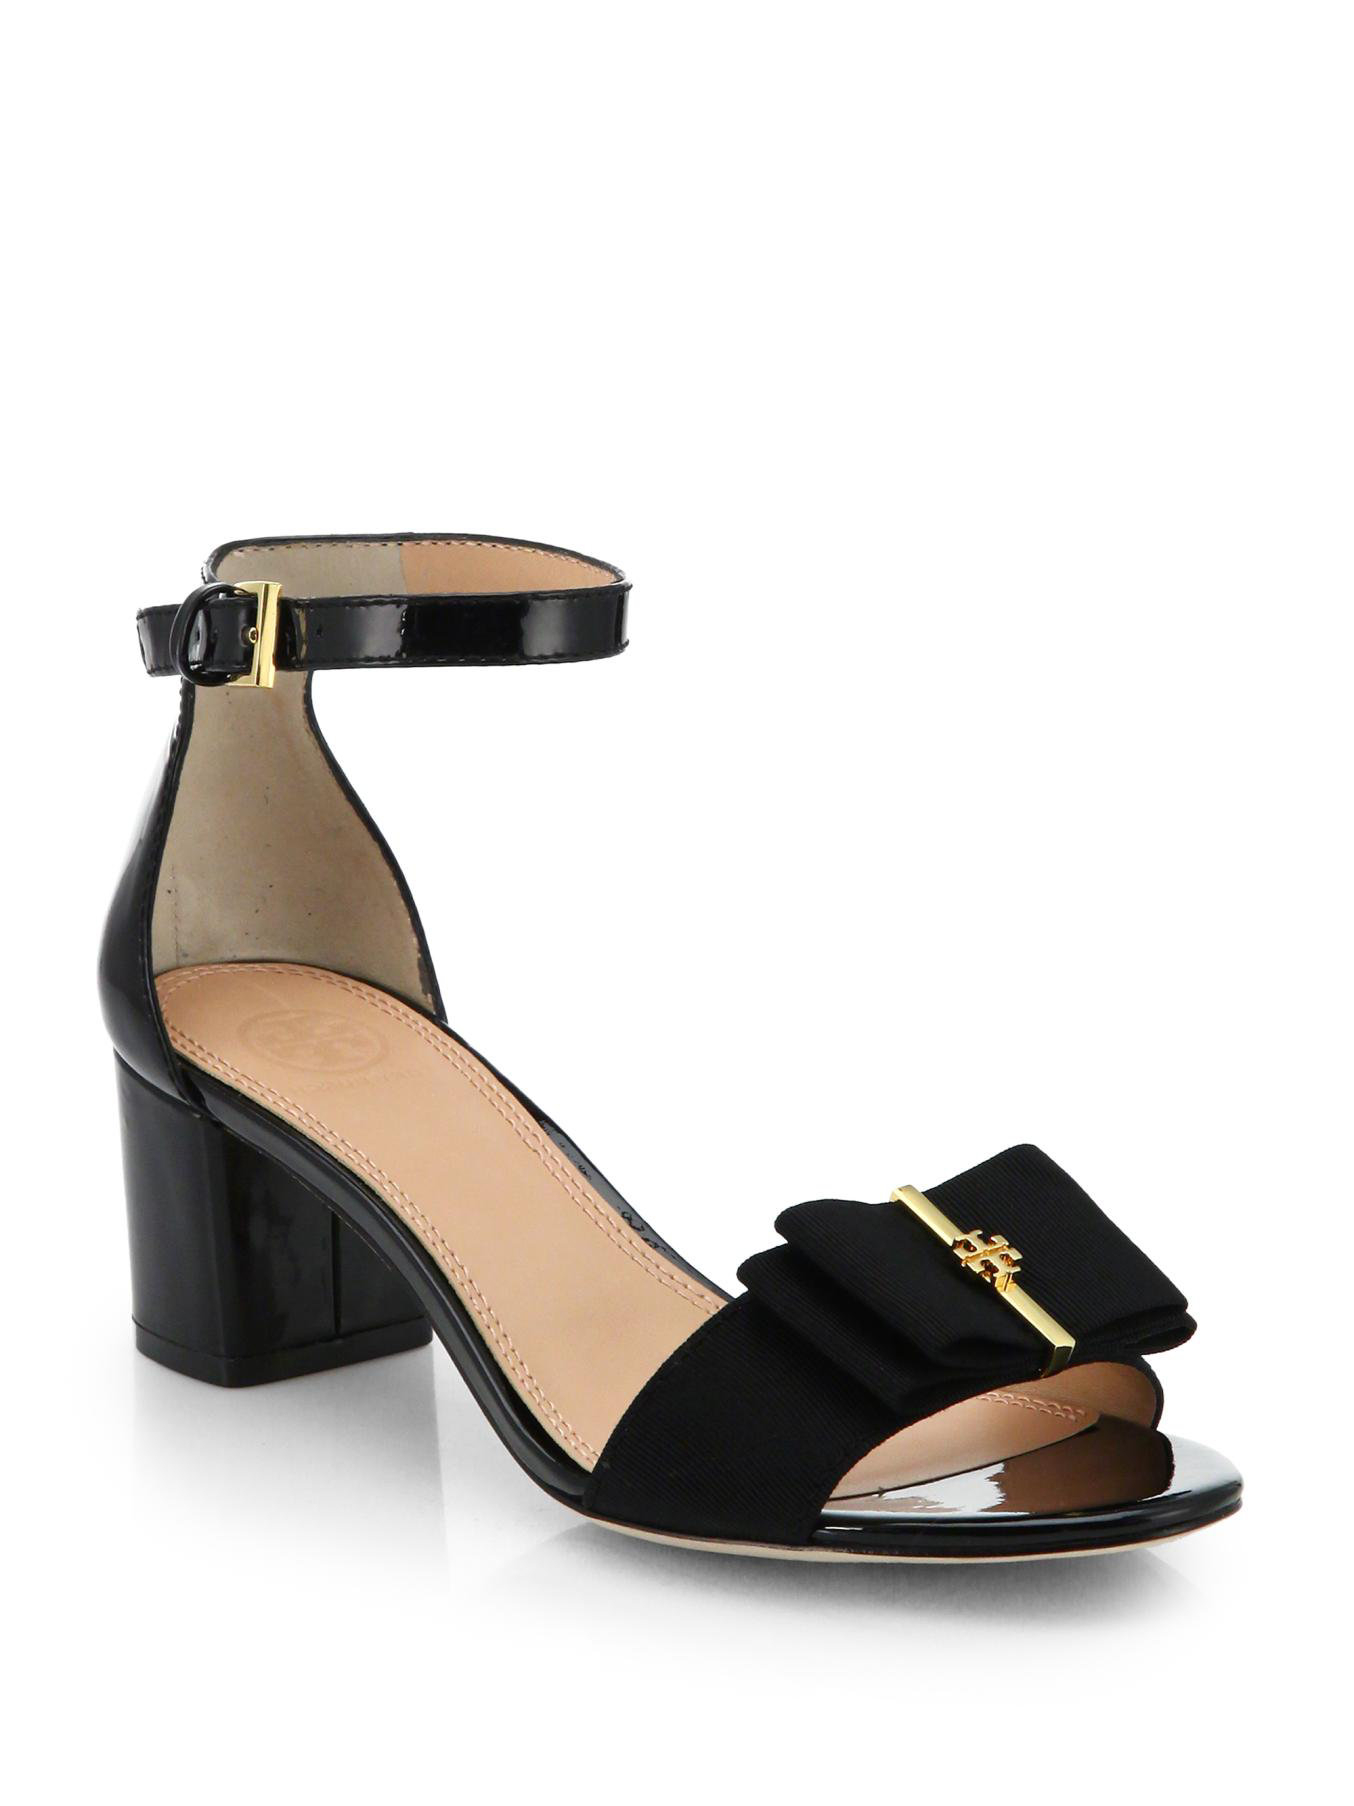 tory burch bow sandals